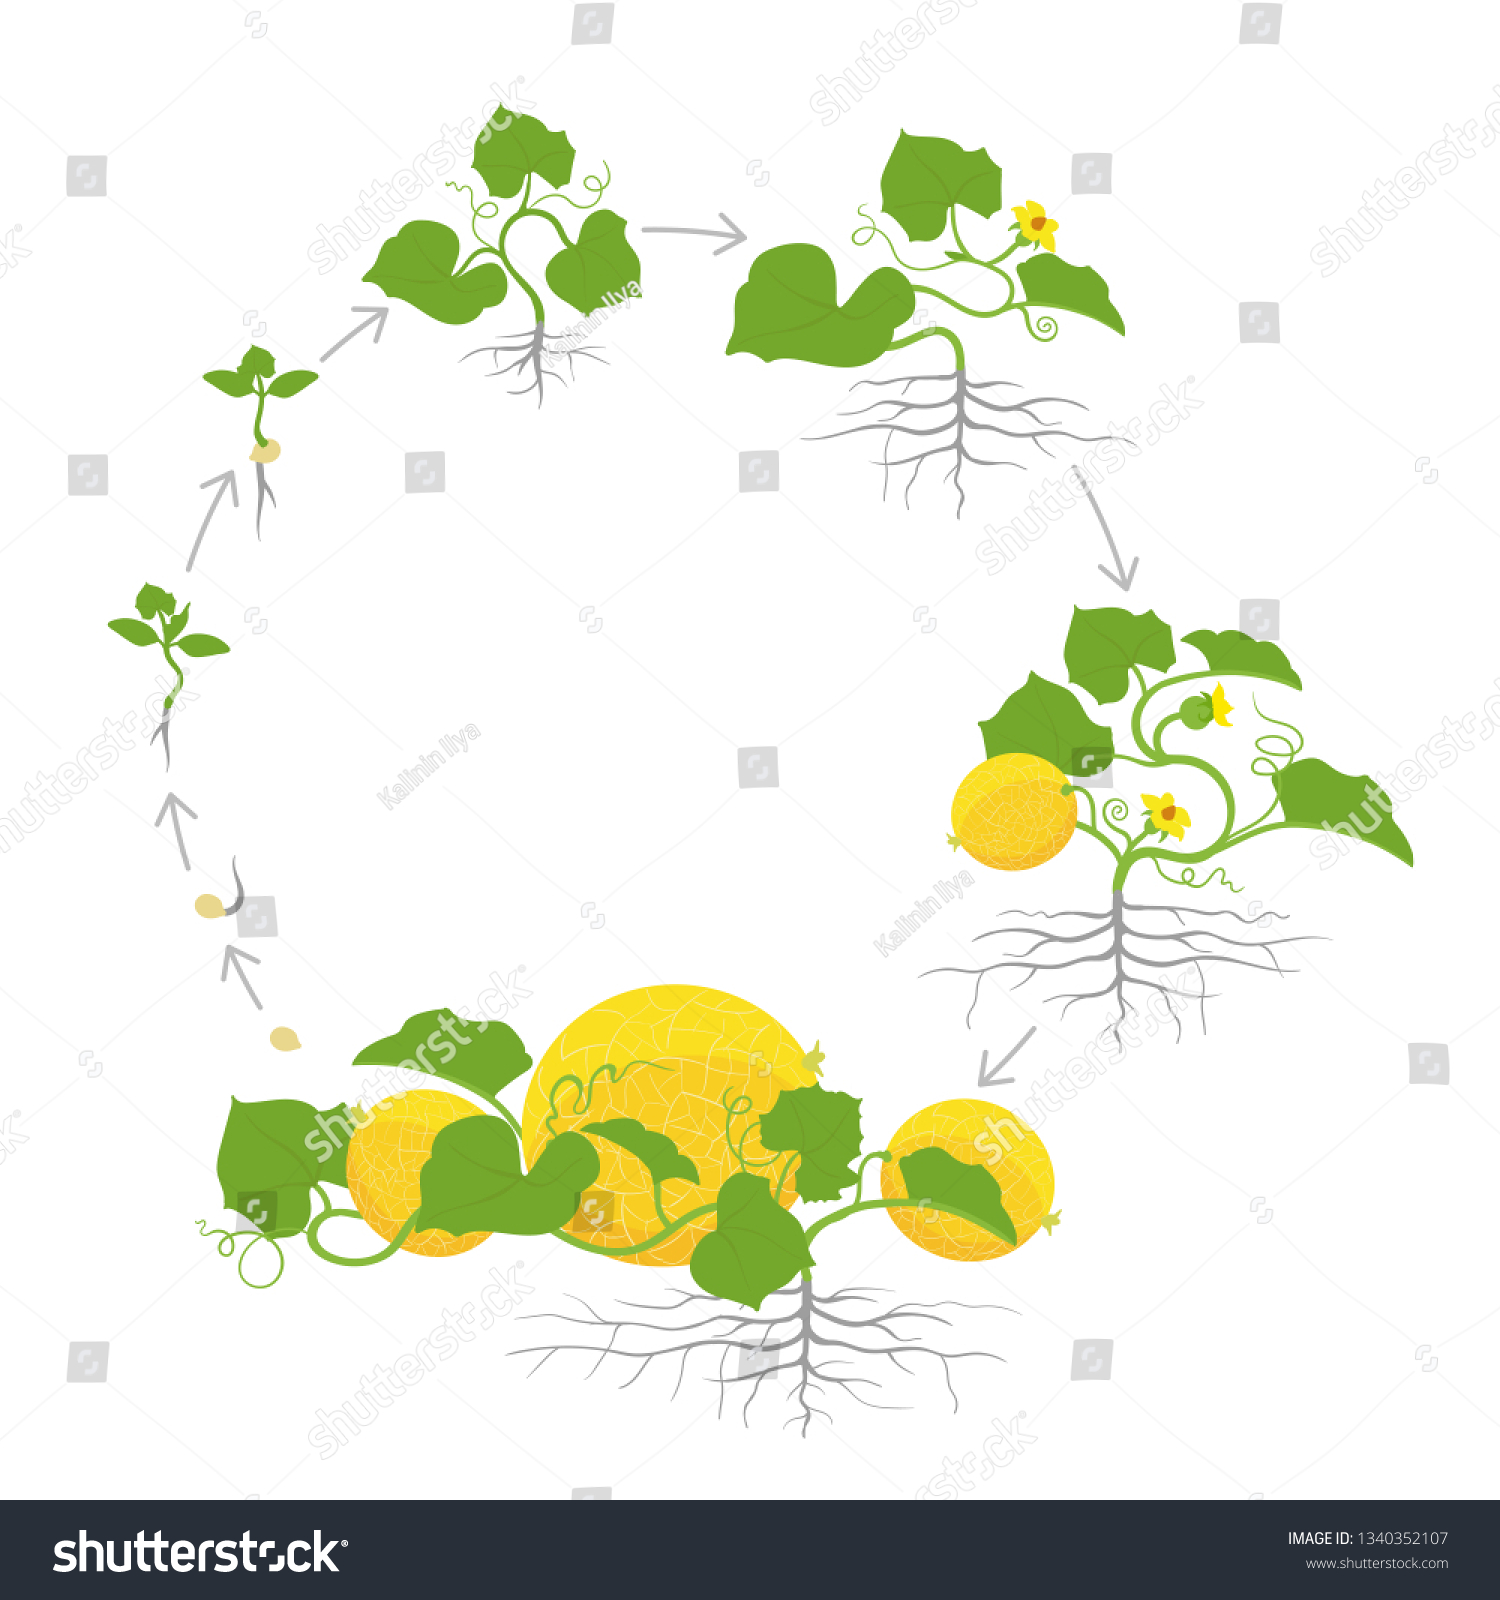 SVG of Crop of melon plant. Circular round growth stages. Vector illustration. Cucumis melo. Melon cantaloupe life cycle. On white background. svg